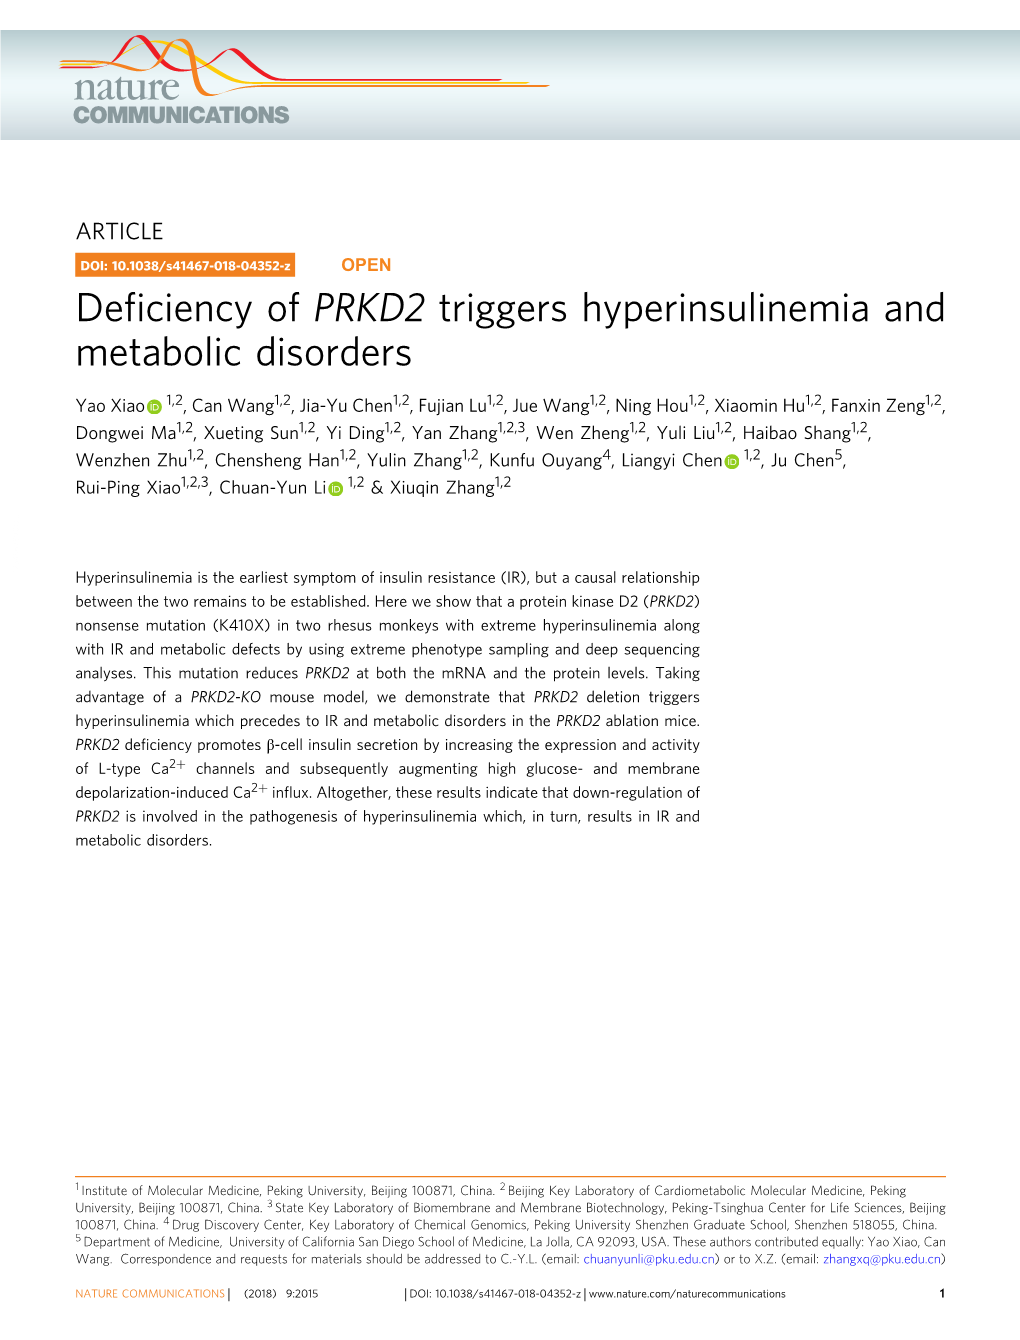 Deficiency of PRKD2 Triggers Hyperinsulinemia and Metabolic Disorders